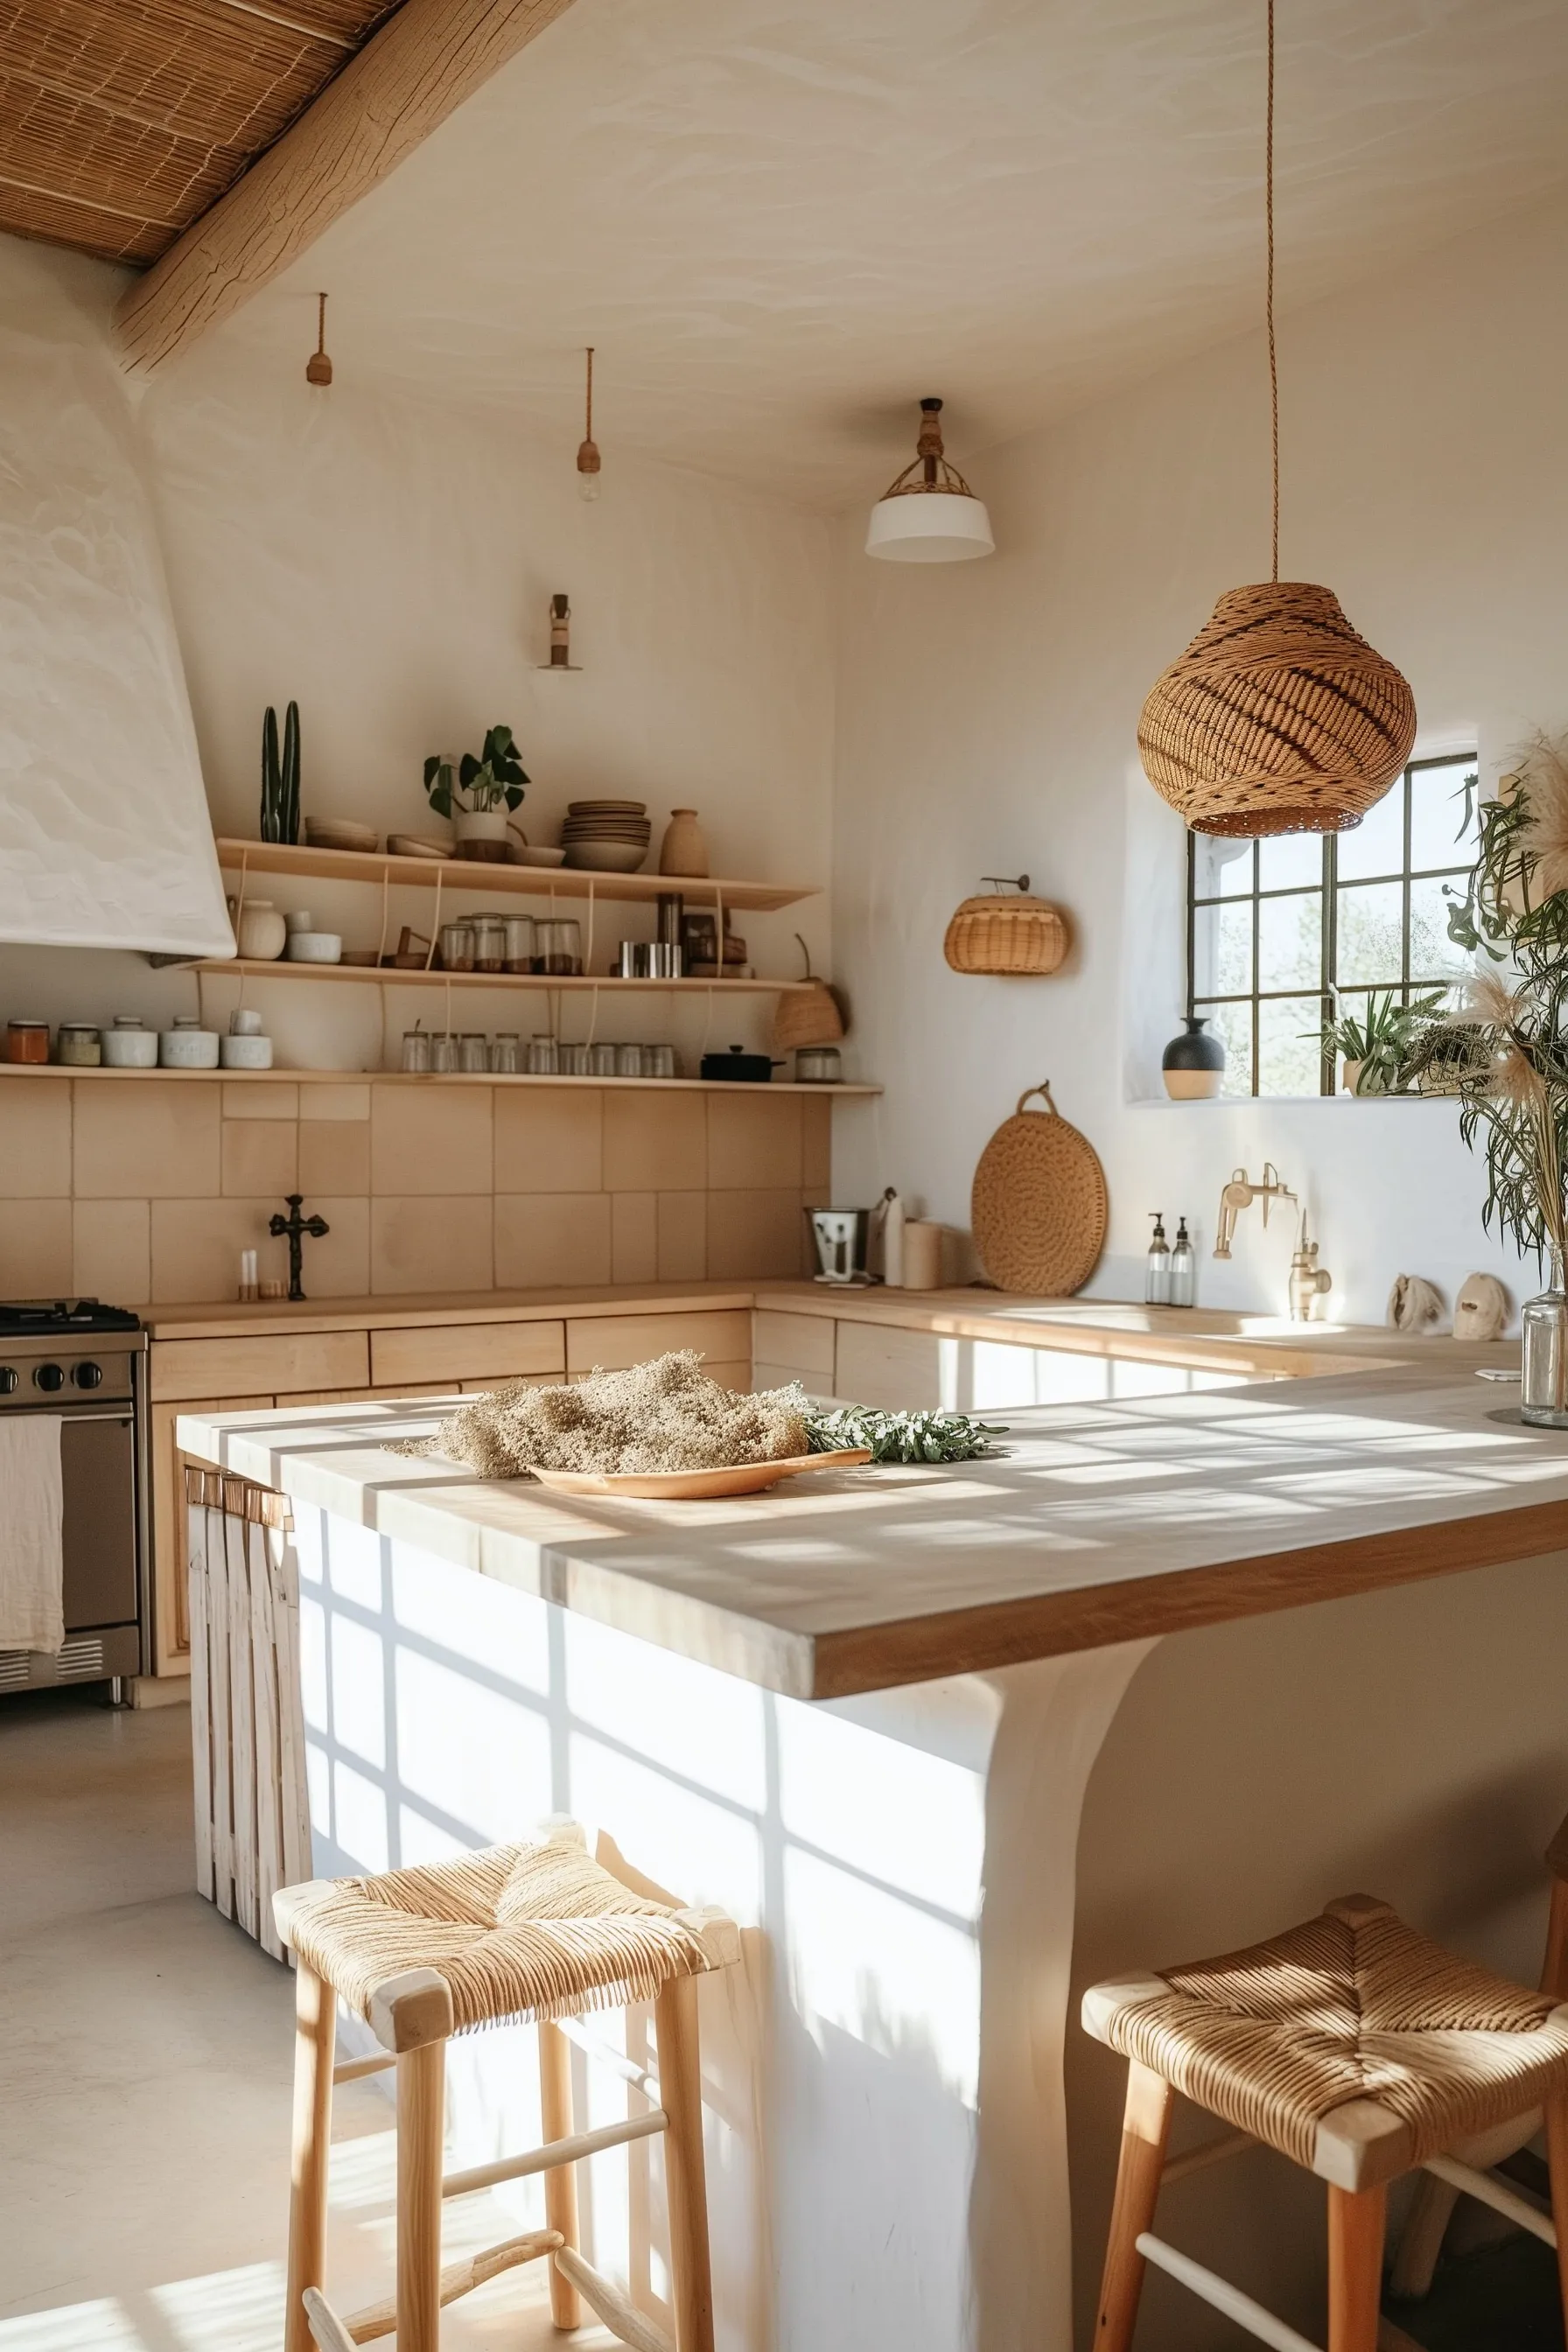 A Bohemian kitchen which maximises natural light and has large windows